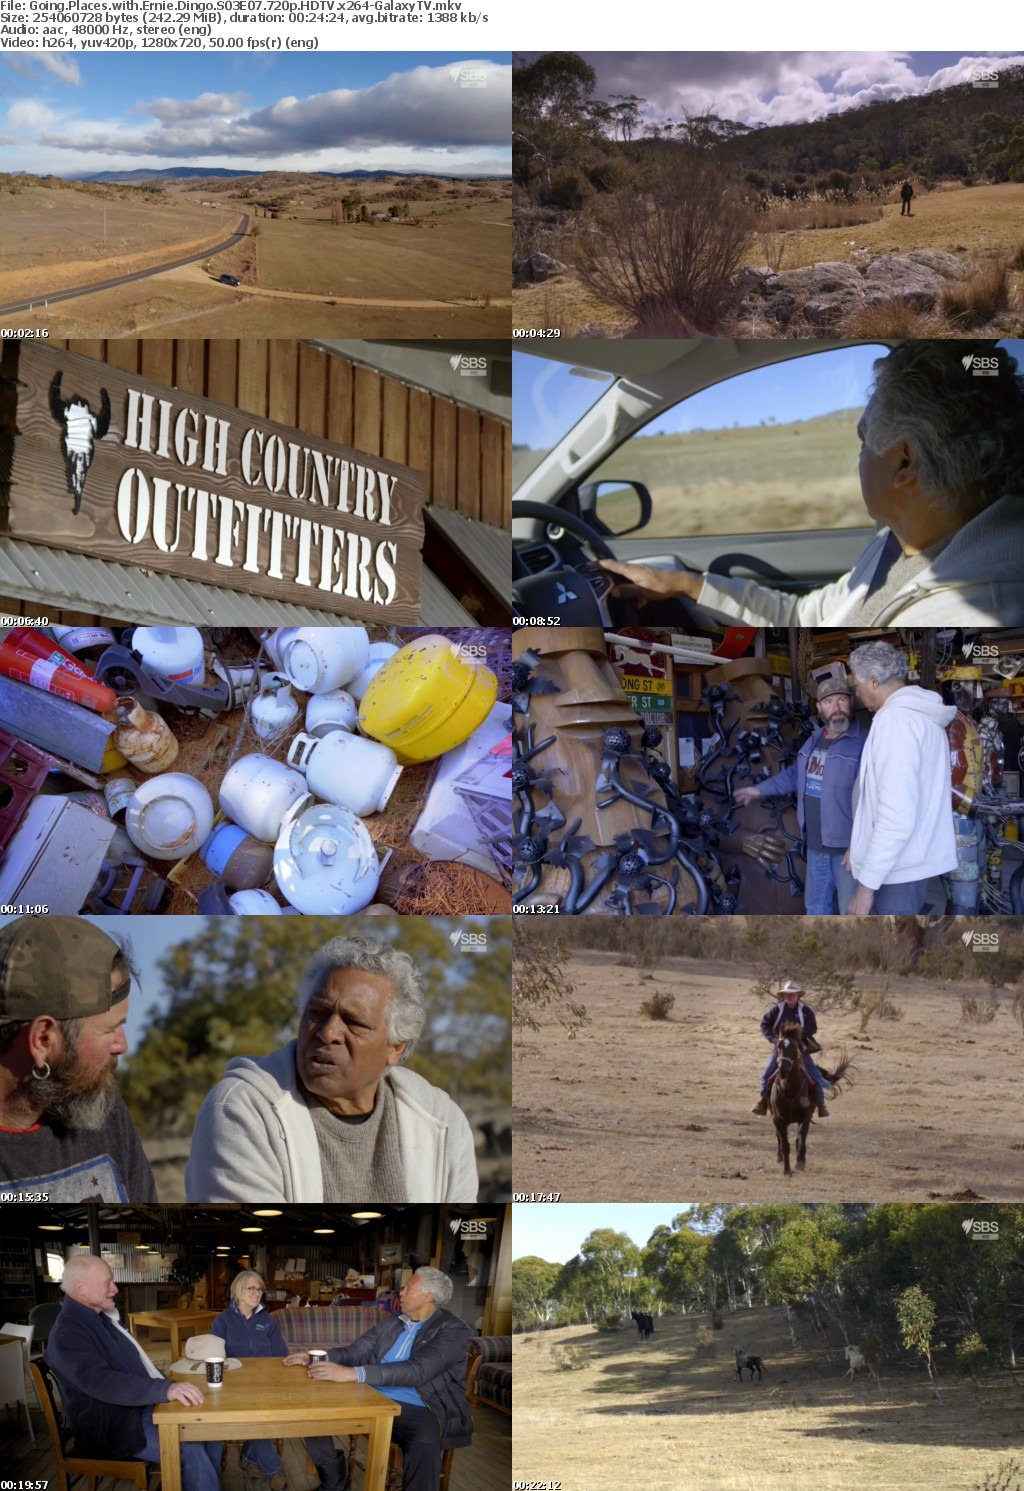 Going Places With Ernie Dingo S03 COMPLETE 720p HDTV x264-GalaxyTV